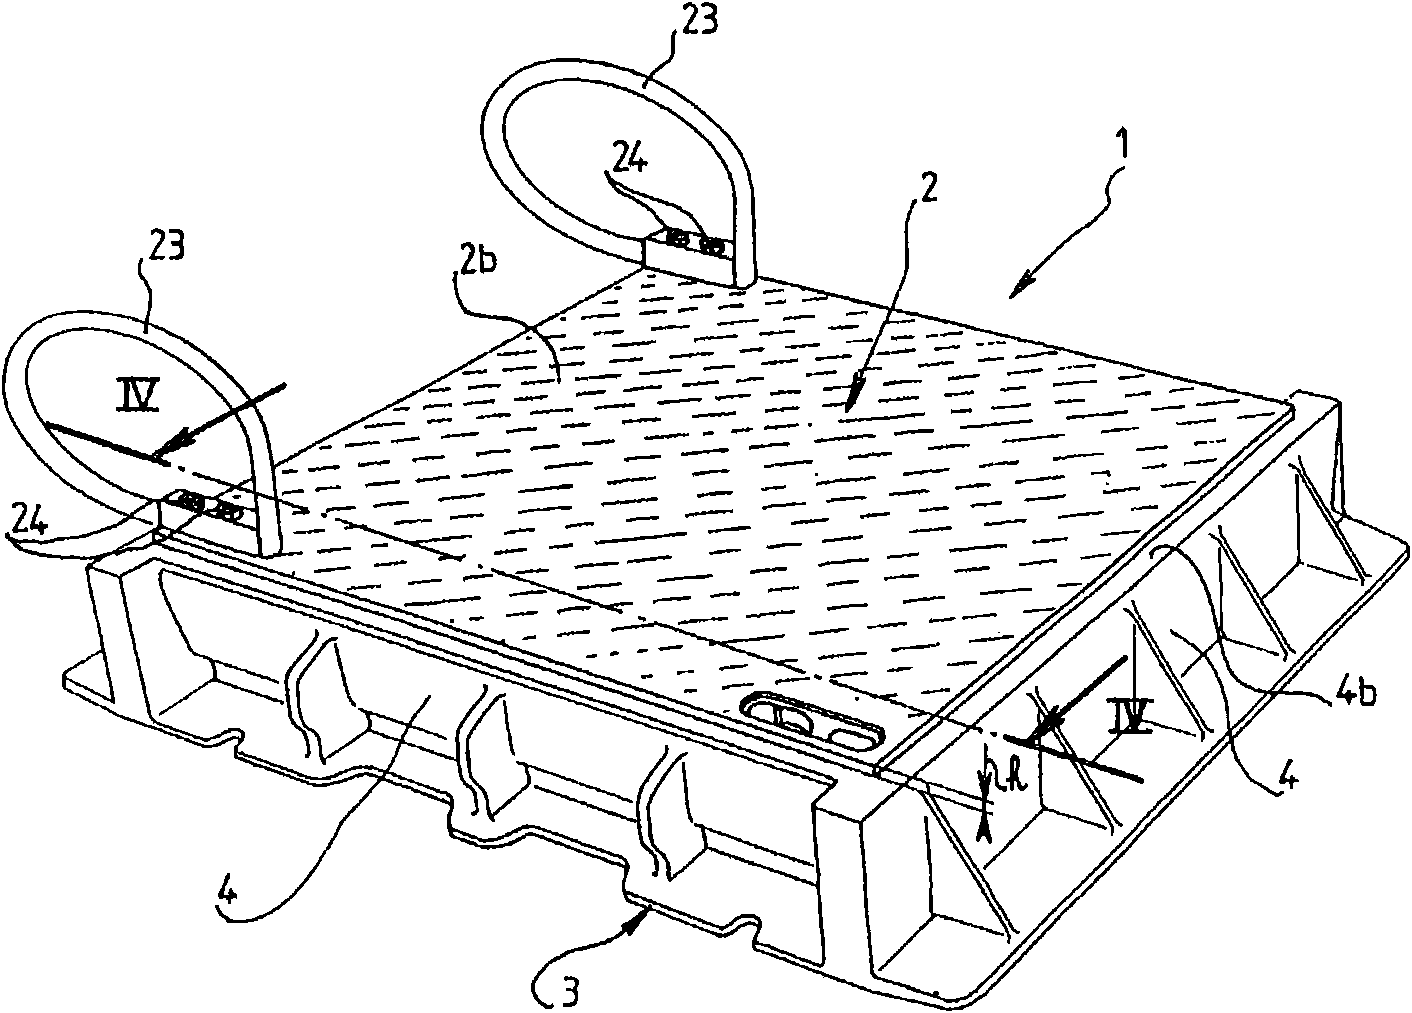 Device for hinging a lid or cover to a frame, such as a manhole